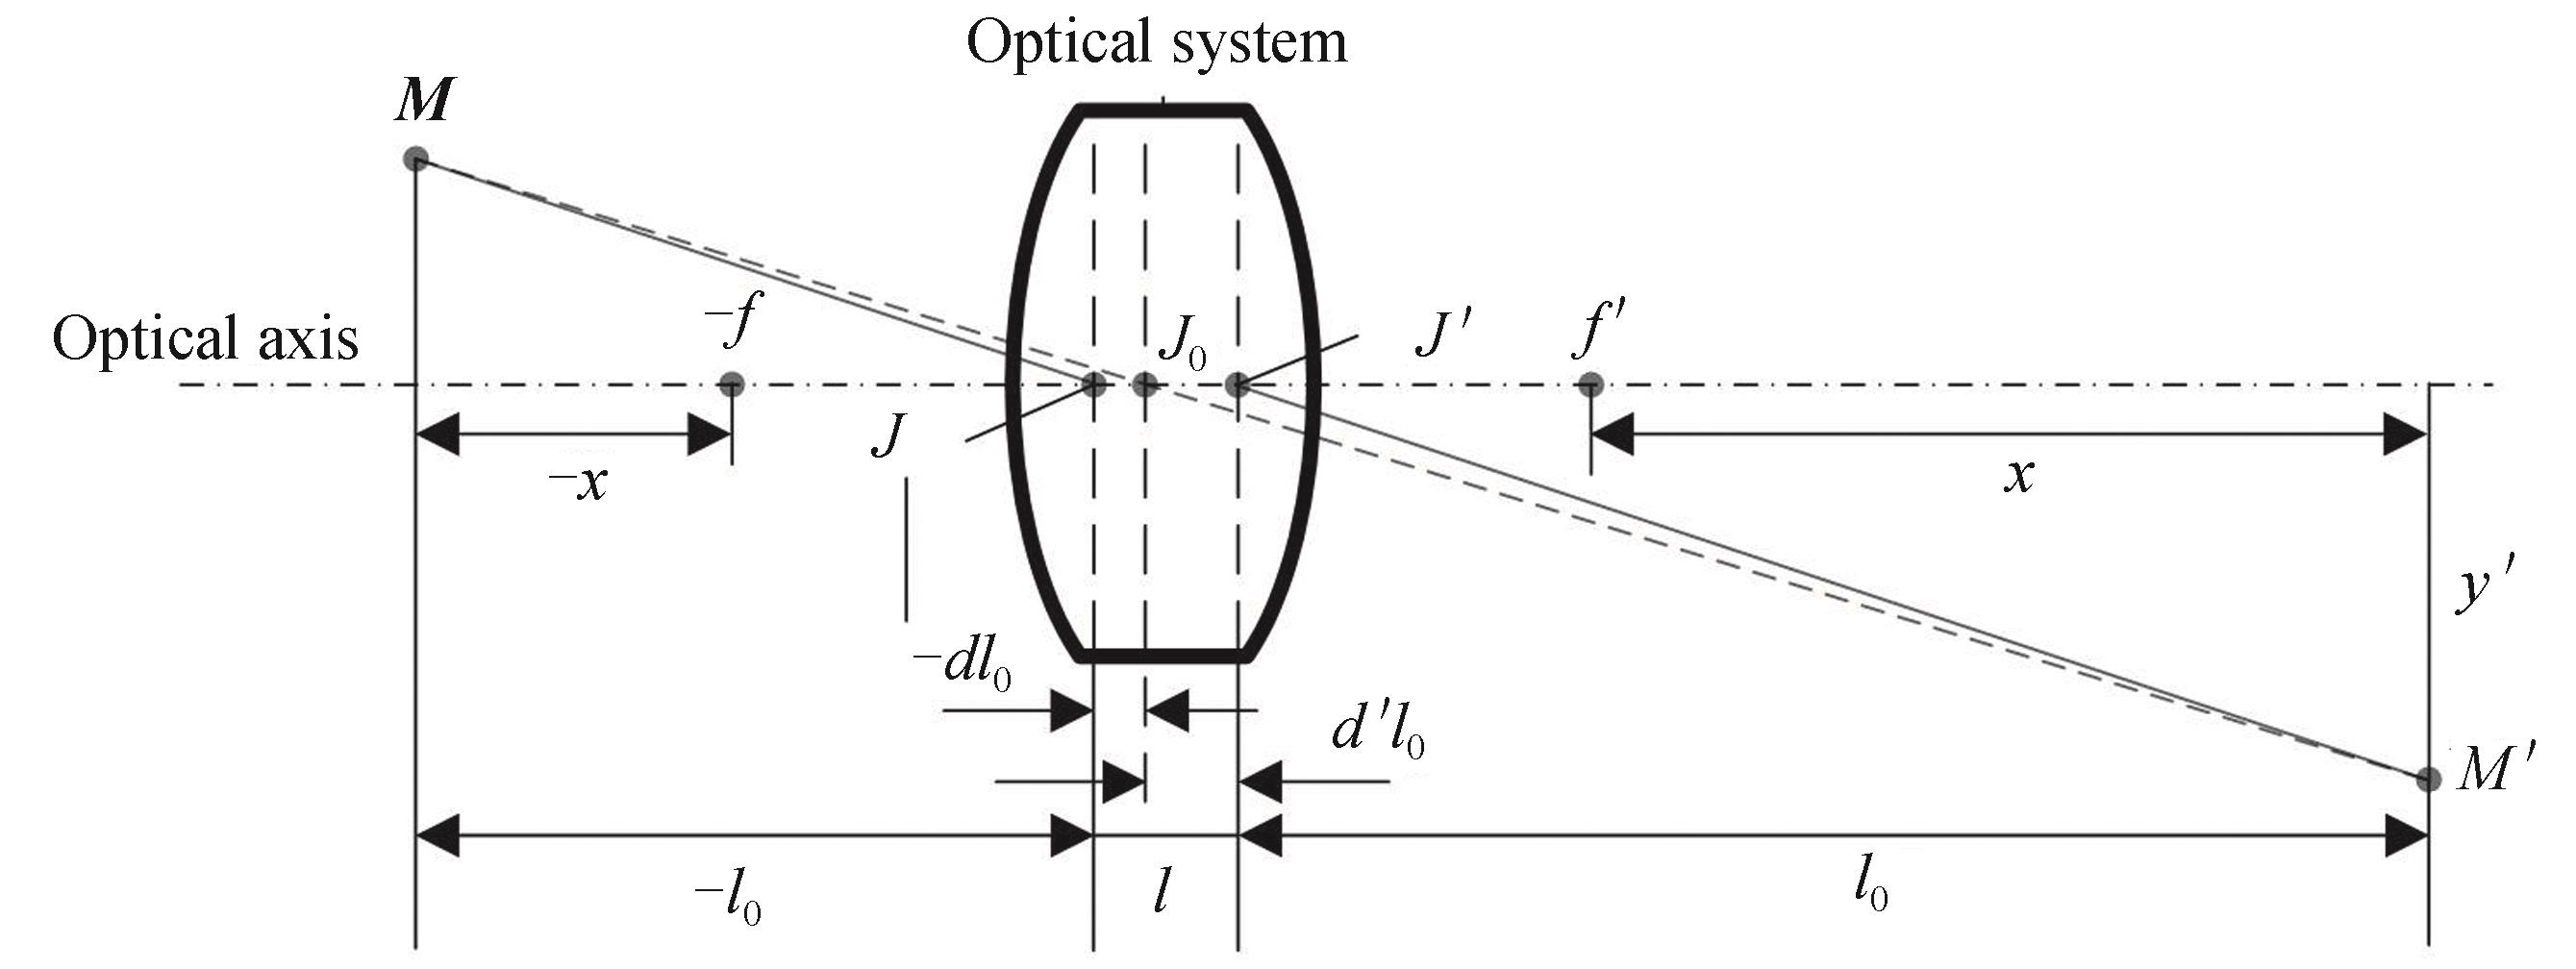 The concept of equivalent nodal point